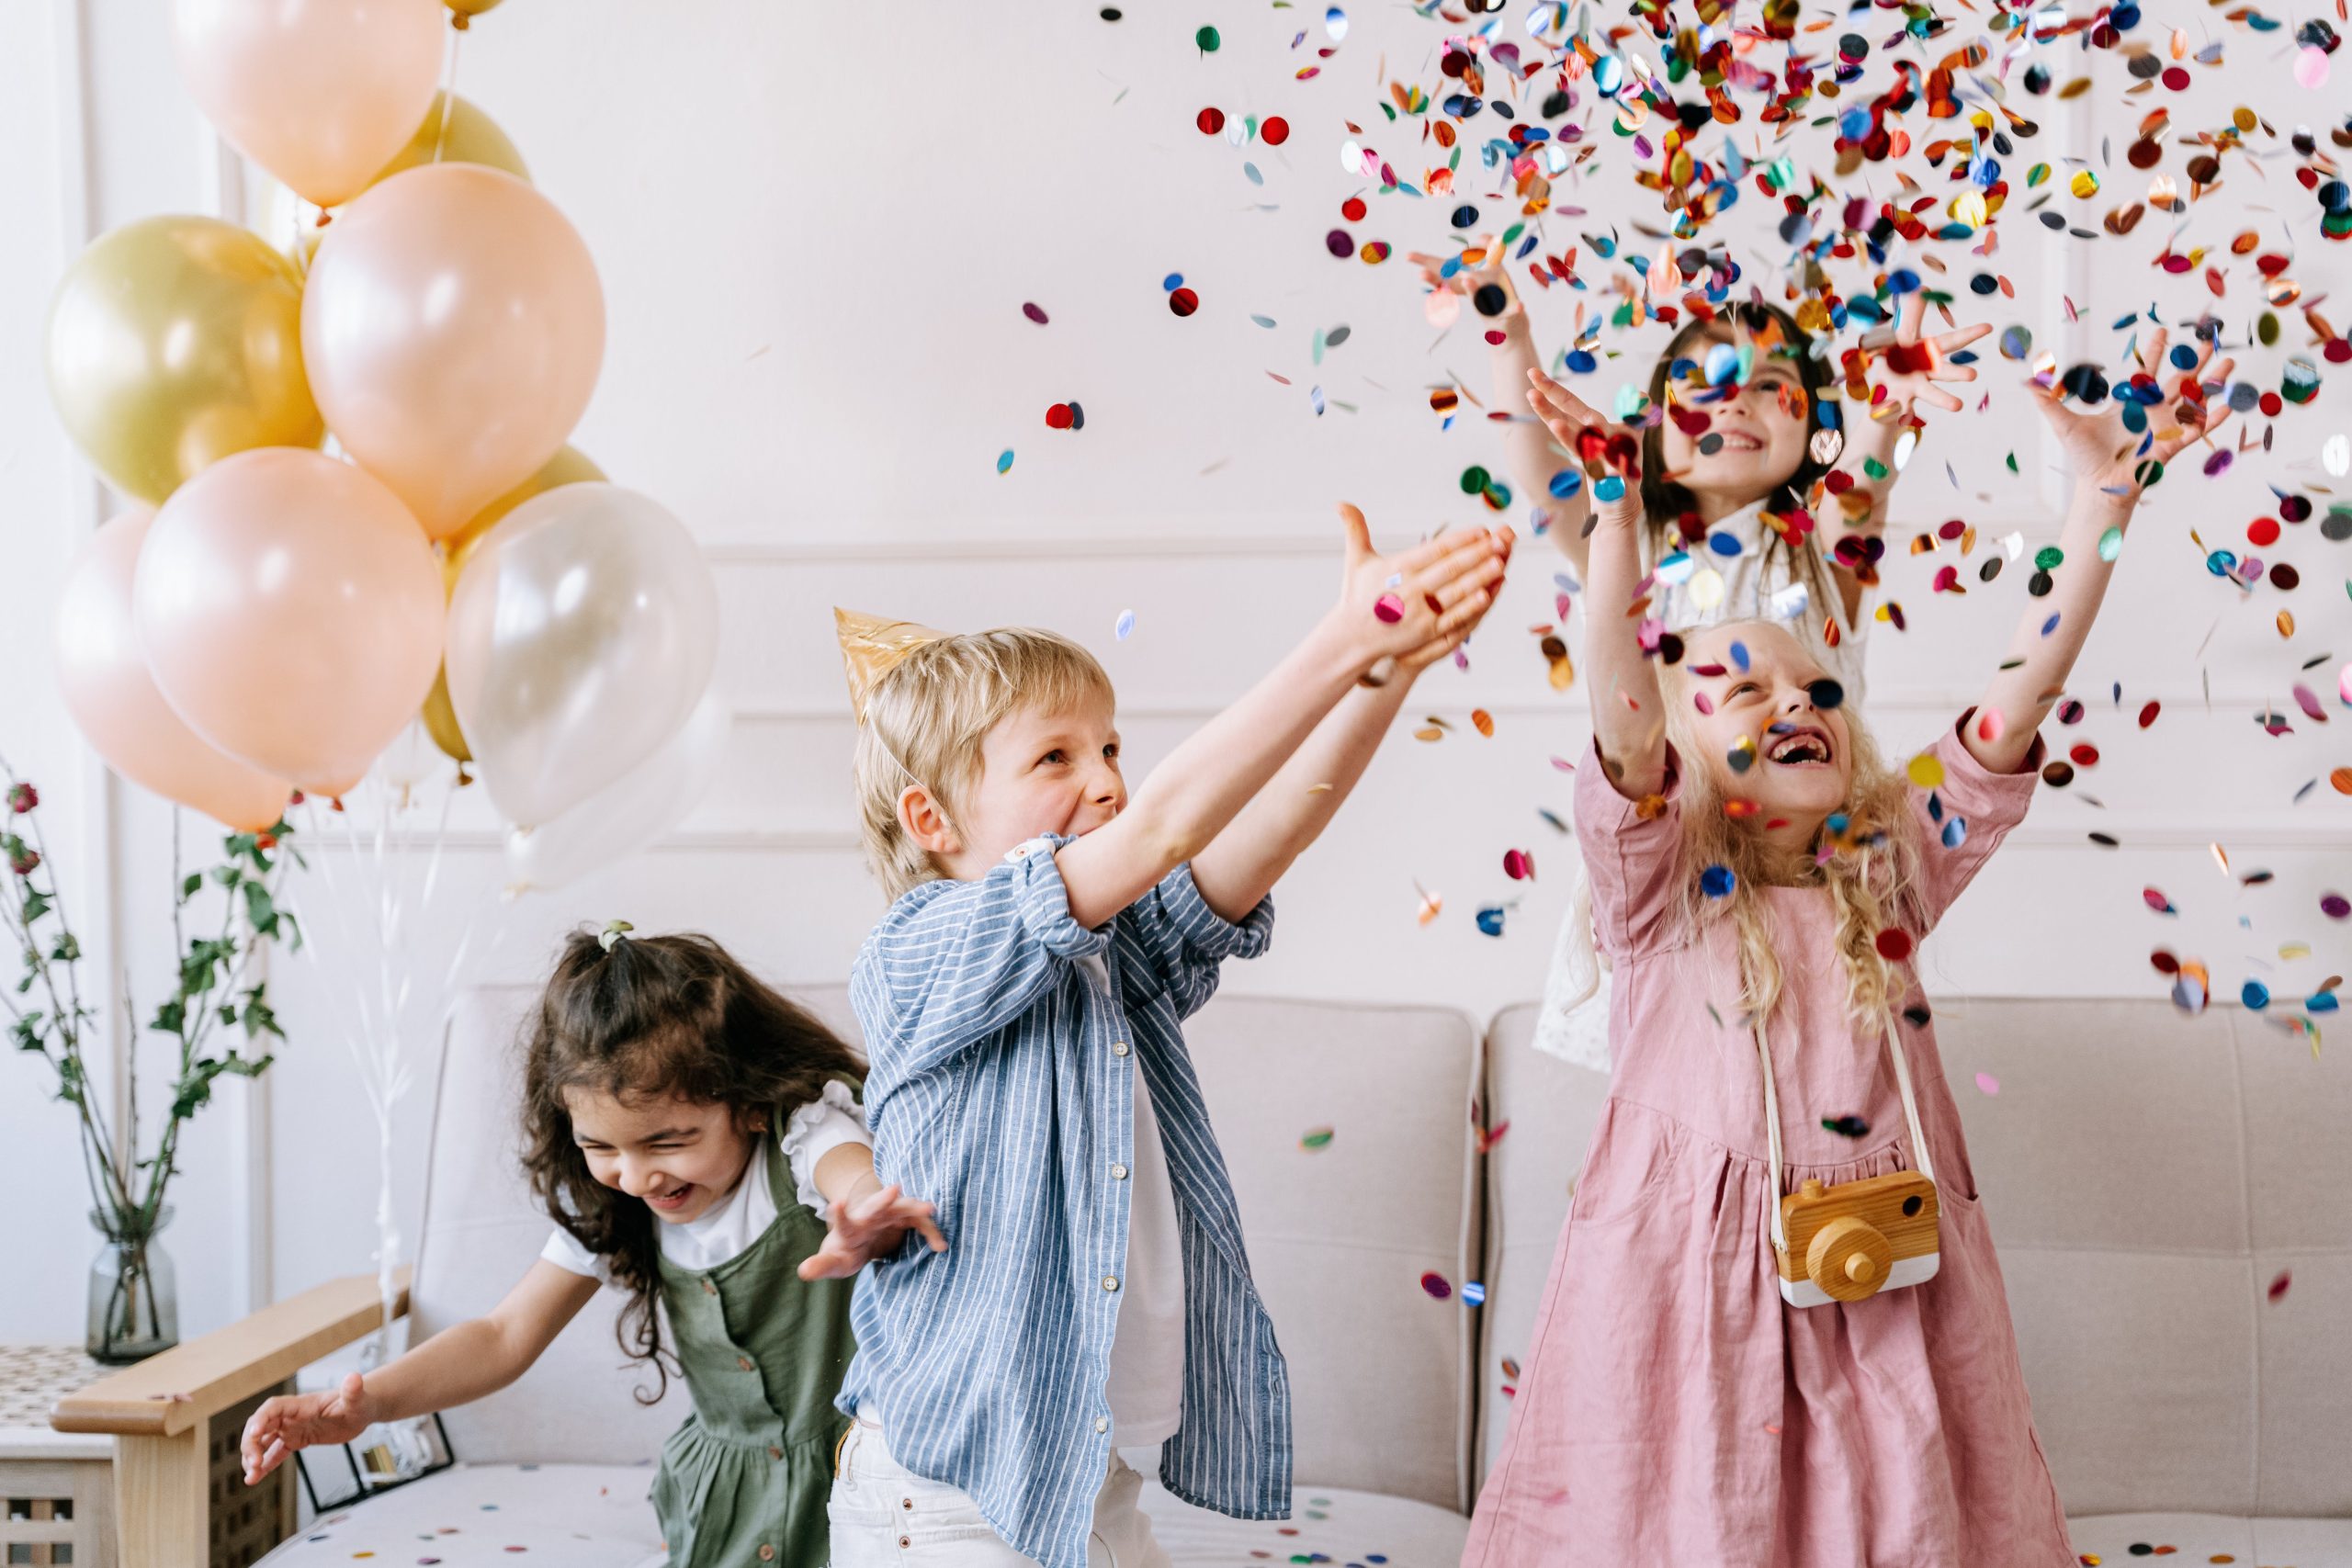 Children playing with confetti at a birthday party in Texas.